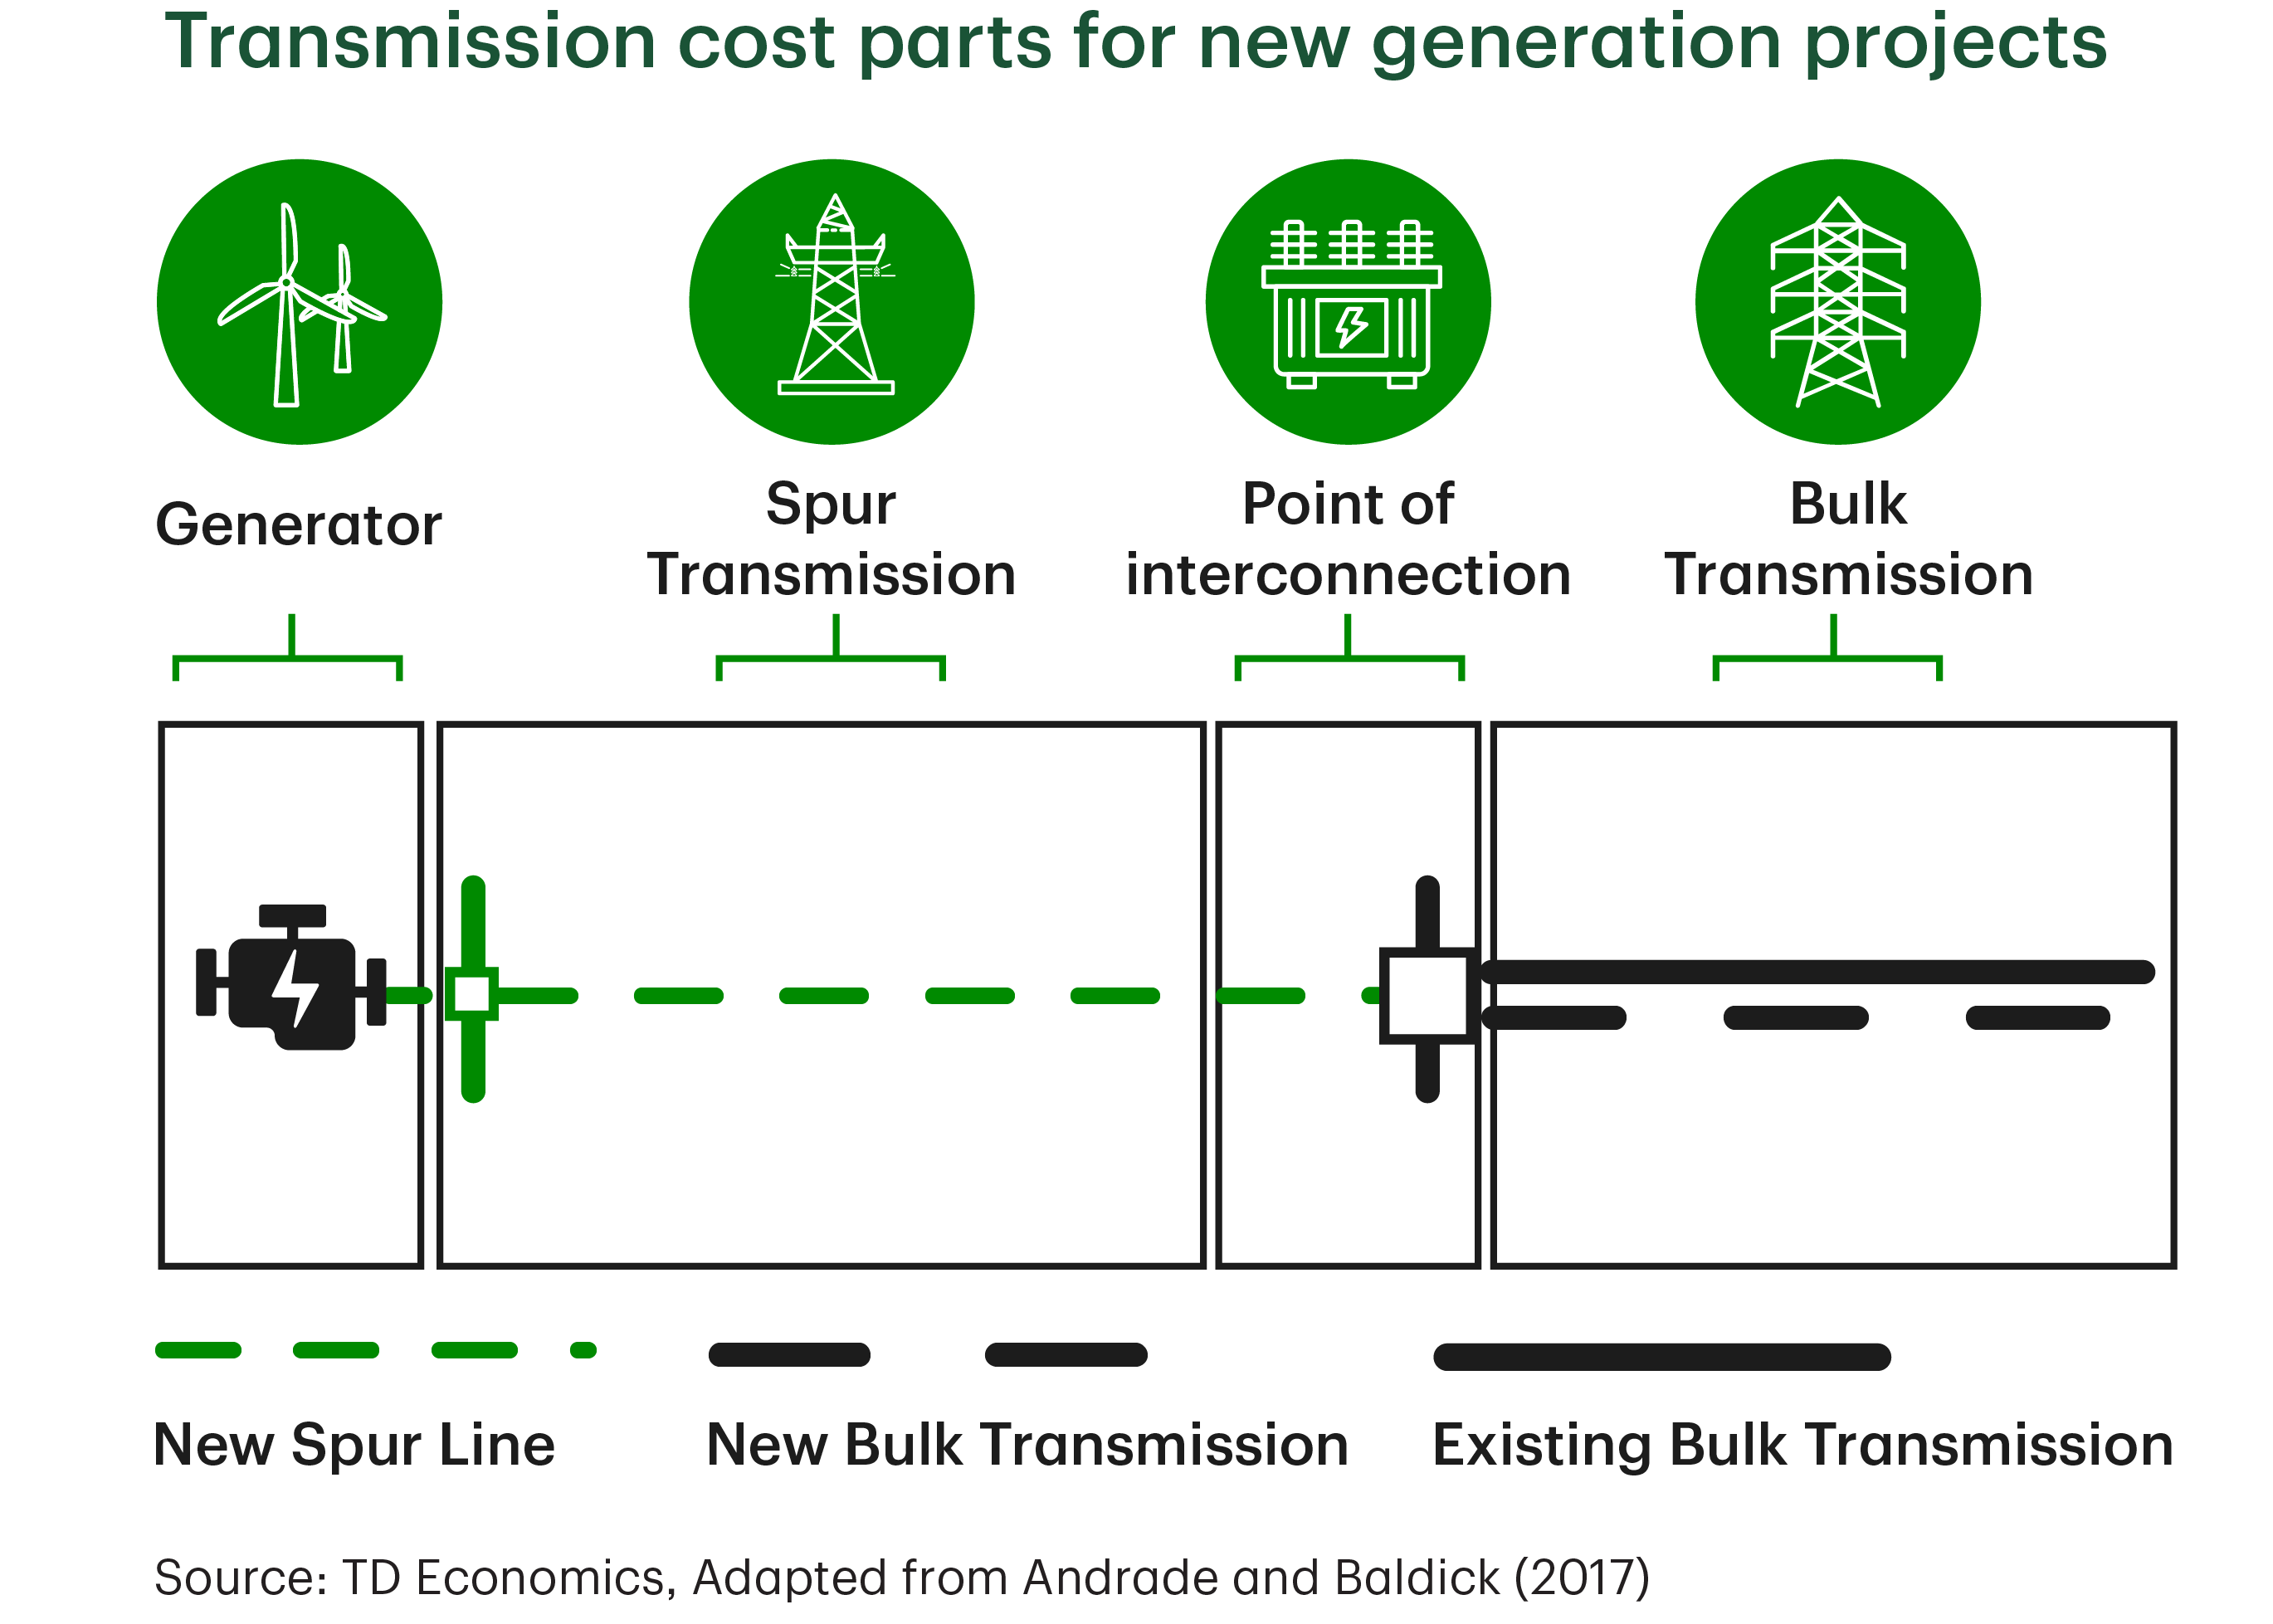 Exhibit shows four transmission cost parts for new electricity generation projects. From left to right the parts are Generator, Spur Transmission, Point of Interconnection, and Bulk Transmission. The graphic shows a new spur line running from a new generation facility and connecting to the bulk transmission at the point of interconnection. The Bulk Transmission segment shows New and Existing Transmission lines.